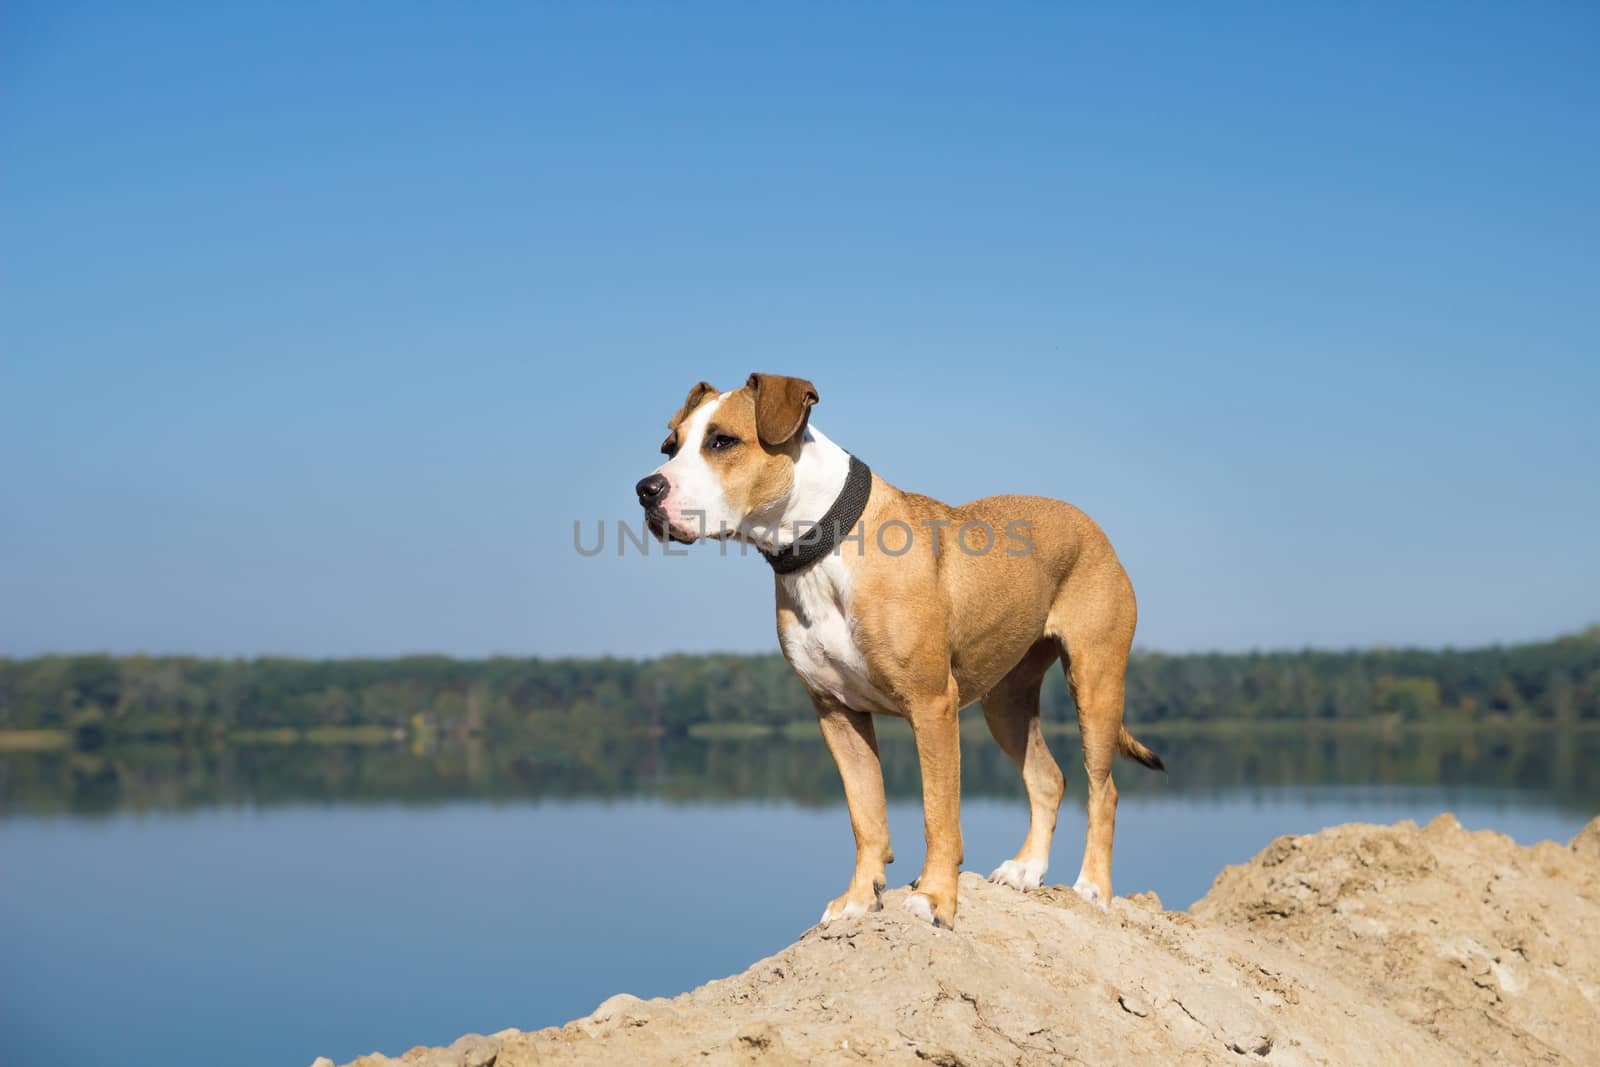 Staffordshire terrier mix dog standing by the lake on sandy ground and looking into distance on a clear sunny day